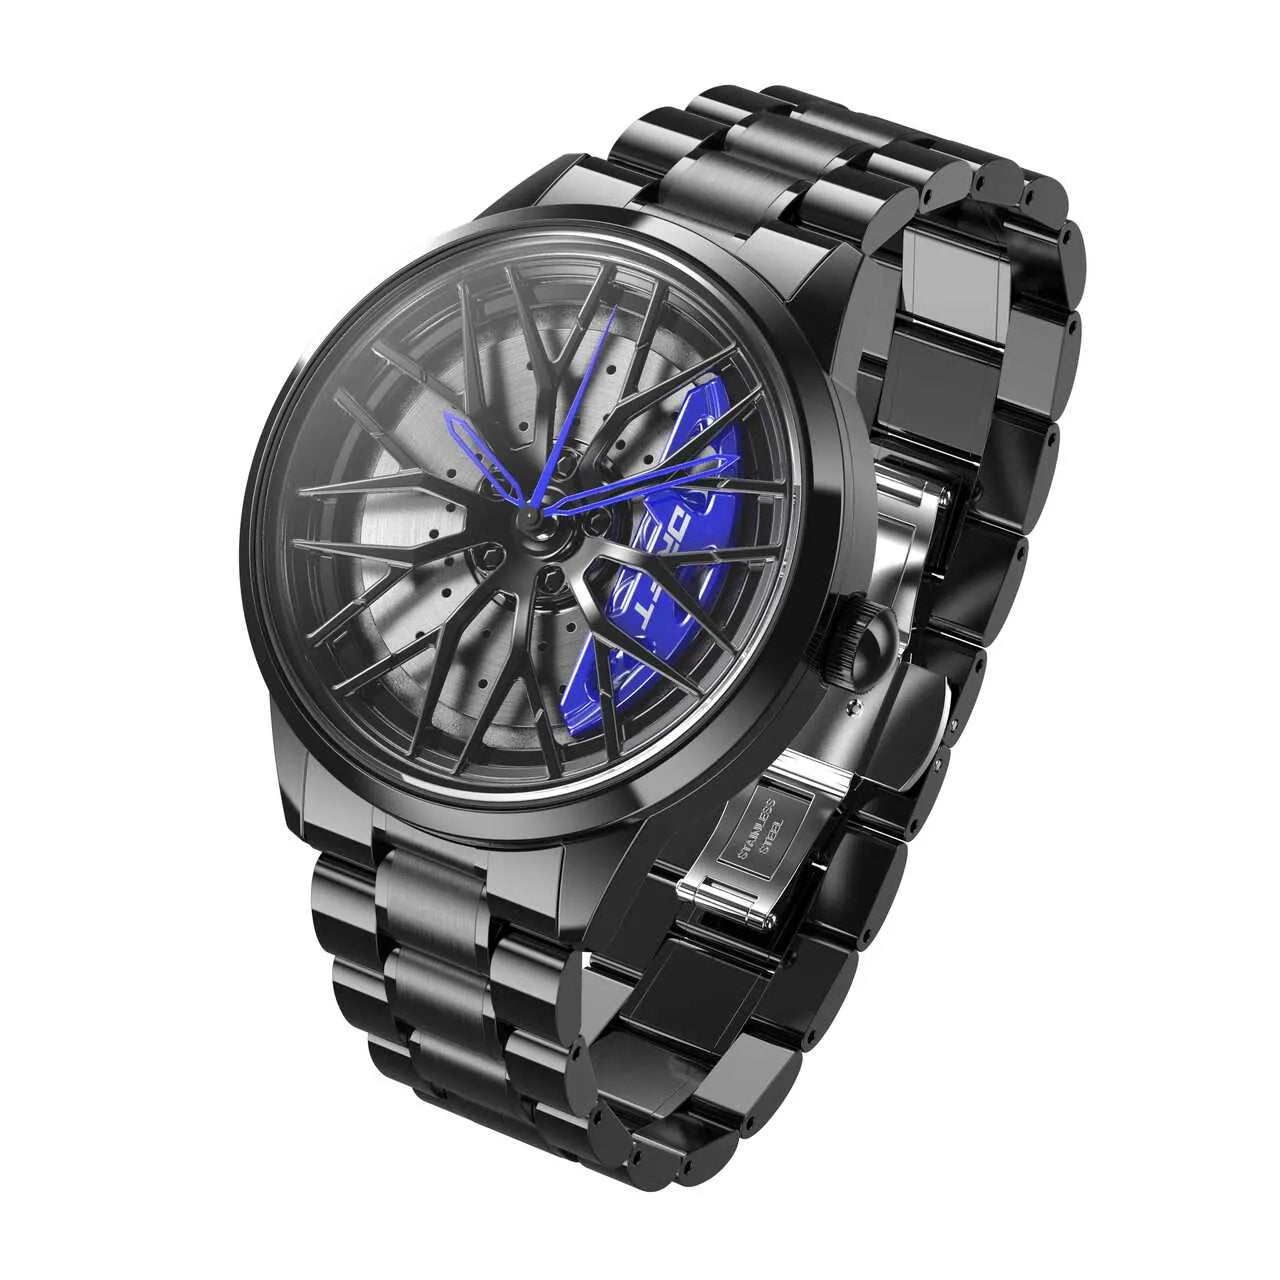 Rev up your style game with our dynamic blue Motorsport Rim Watch! Precision crafted by a forward-thinking German startup, these watches are designed to captivate motorsport, tuning, and auto aficionados. Get ready to ignite your passion! #id_46744363008330